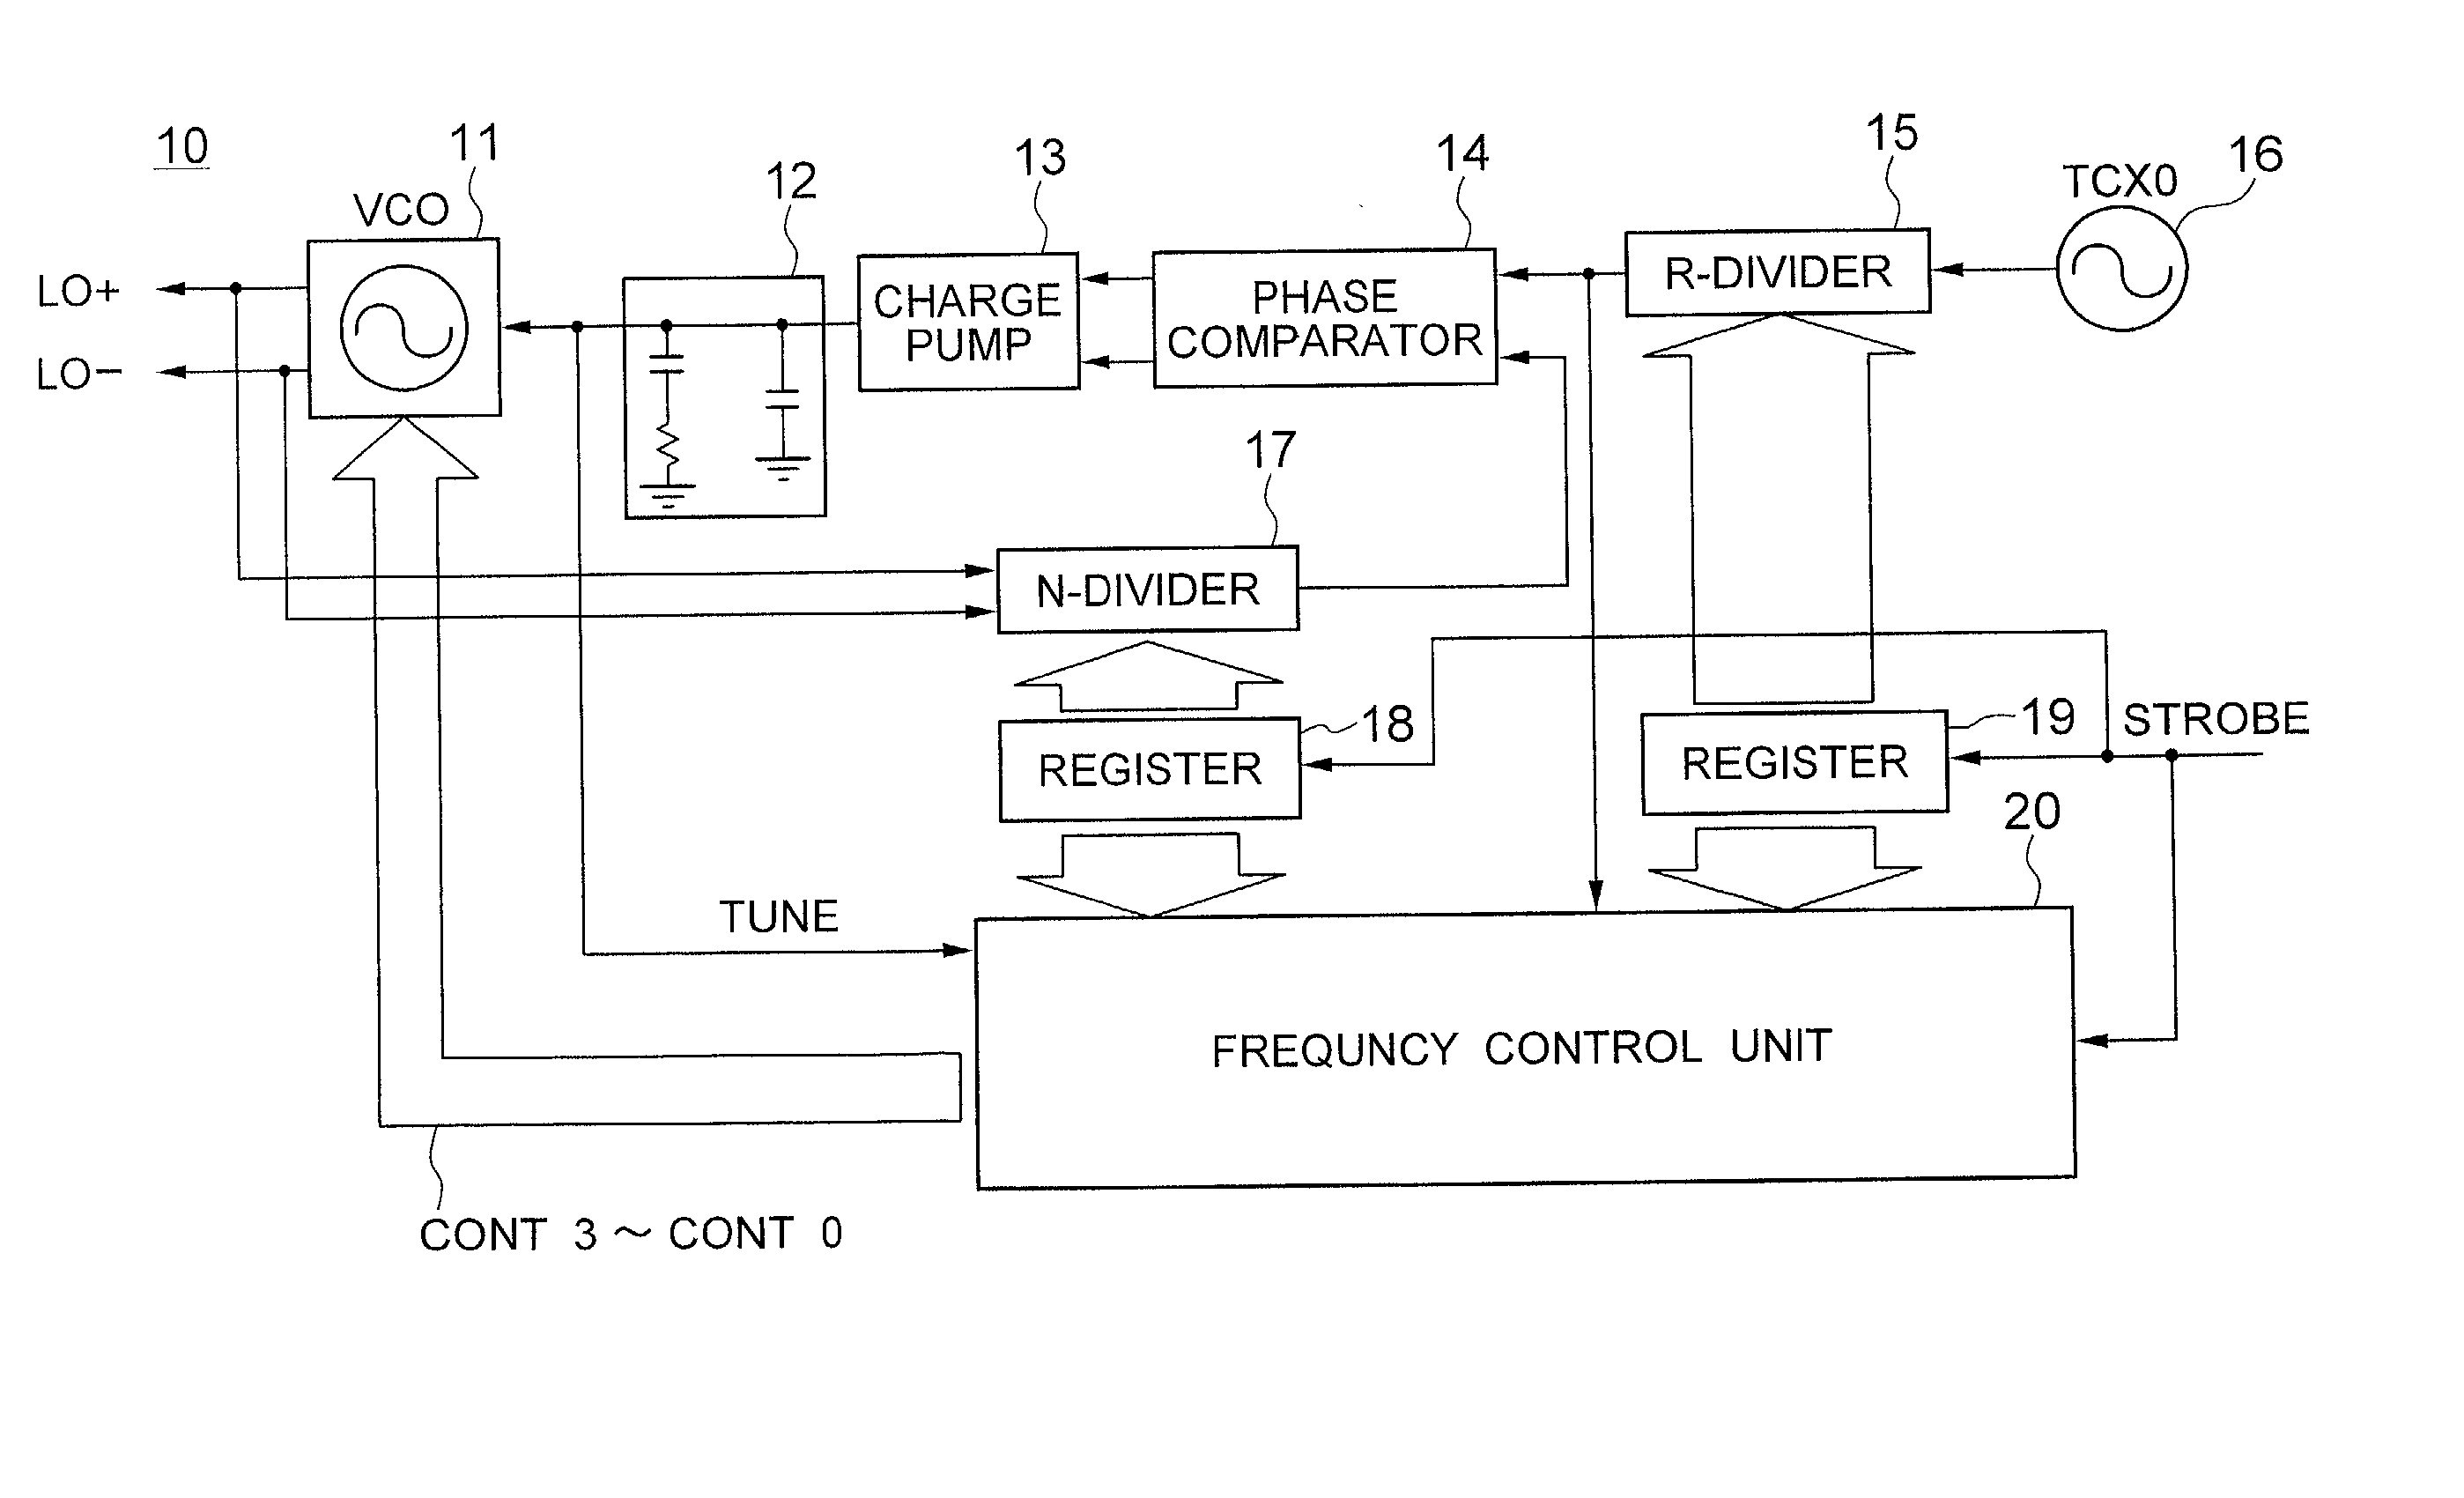 PLL circuit having a variable output frequency